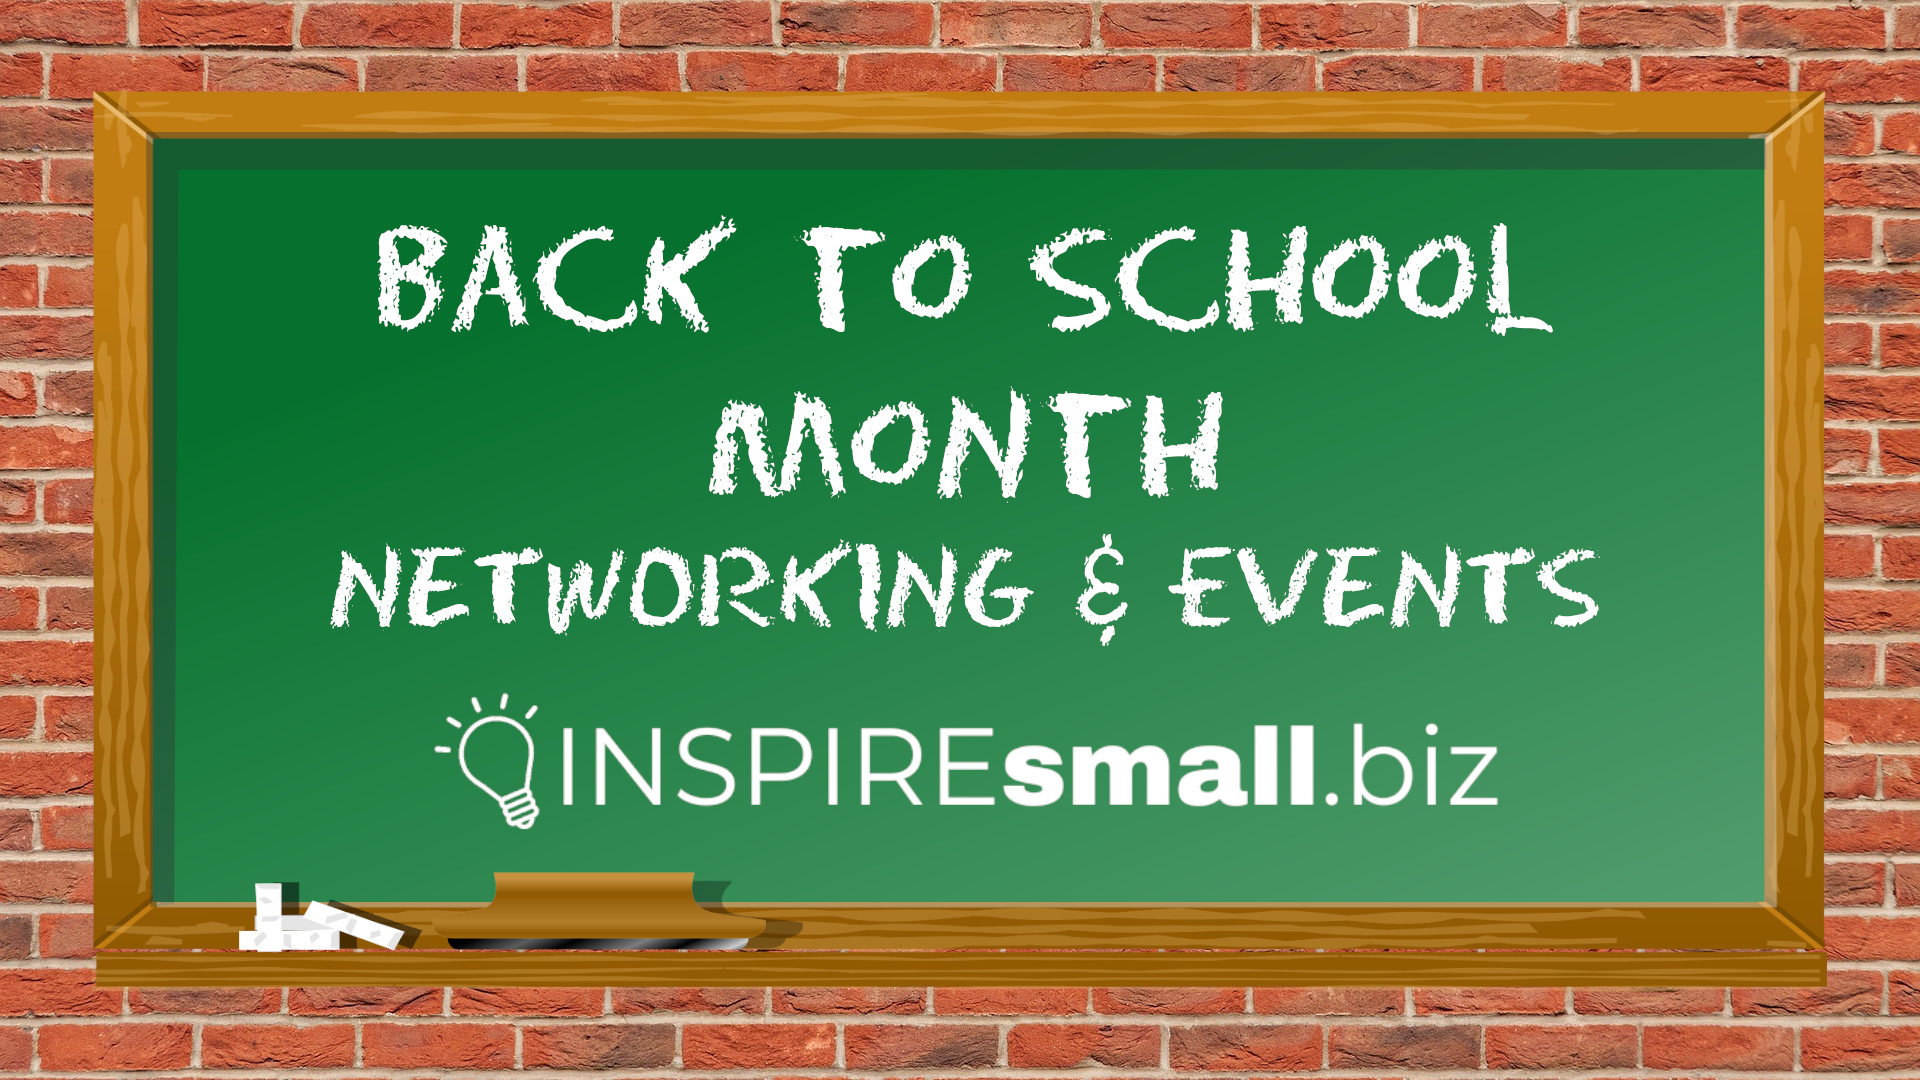 Chalkboard with the text 'Back to school month, networking & events' written on it in white chalk